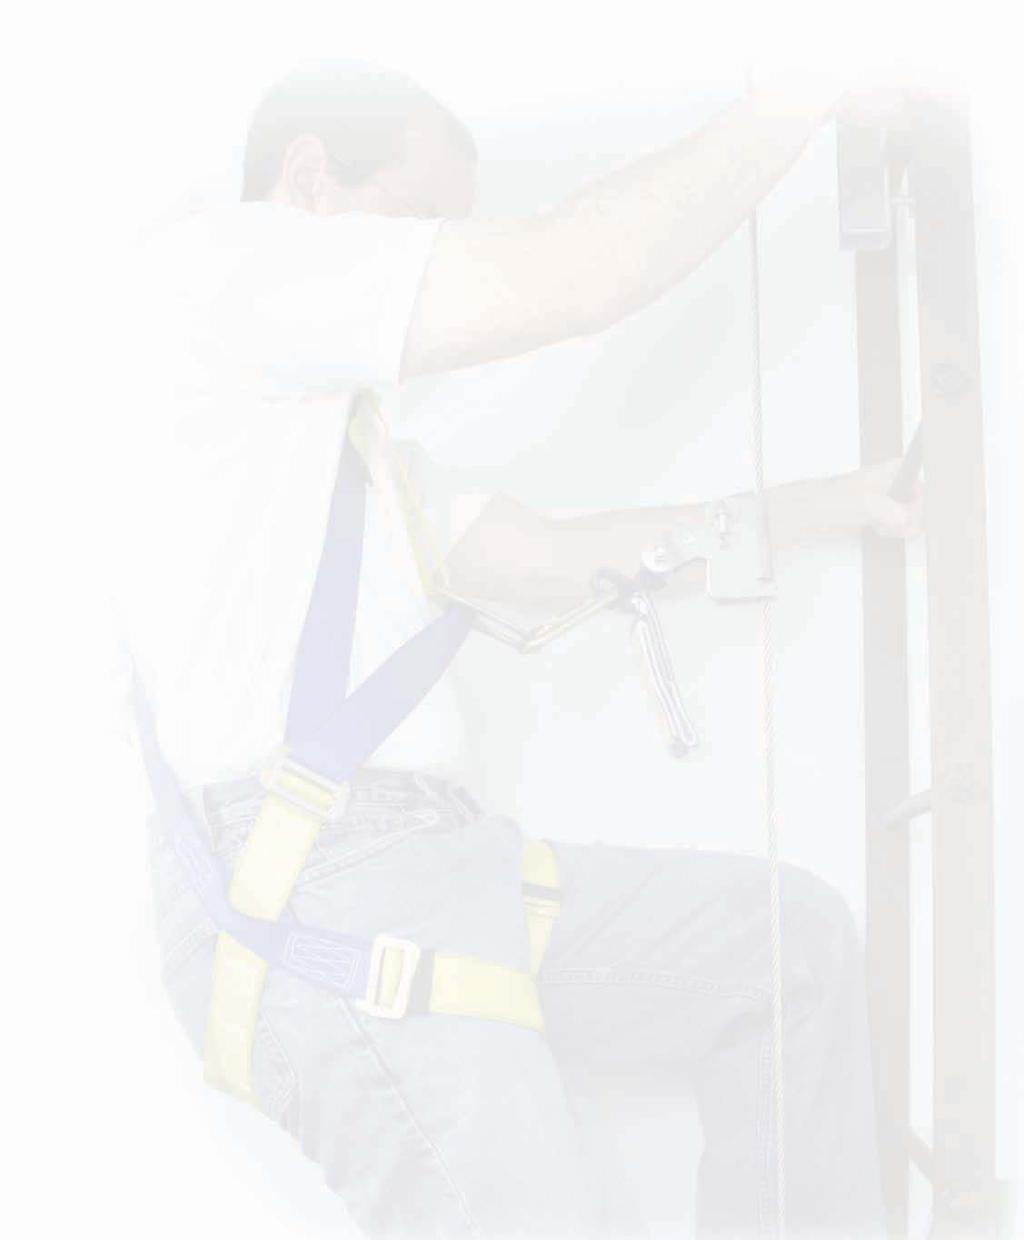 LADDER EQUIPMENT LADDER SAFETY SYSTEMS Designed for installation on fixed, permanent ladders of virtually any height, Gemtor ladder climber s safety systems feature a safety sleeve that automatically